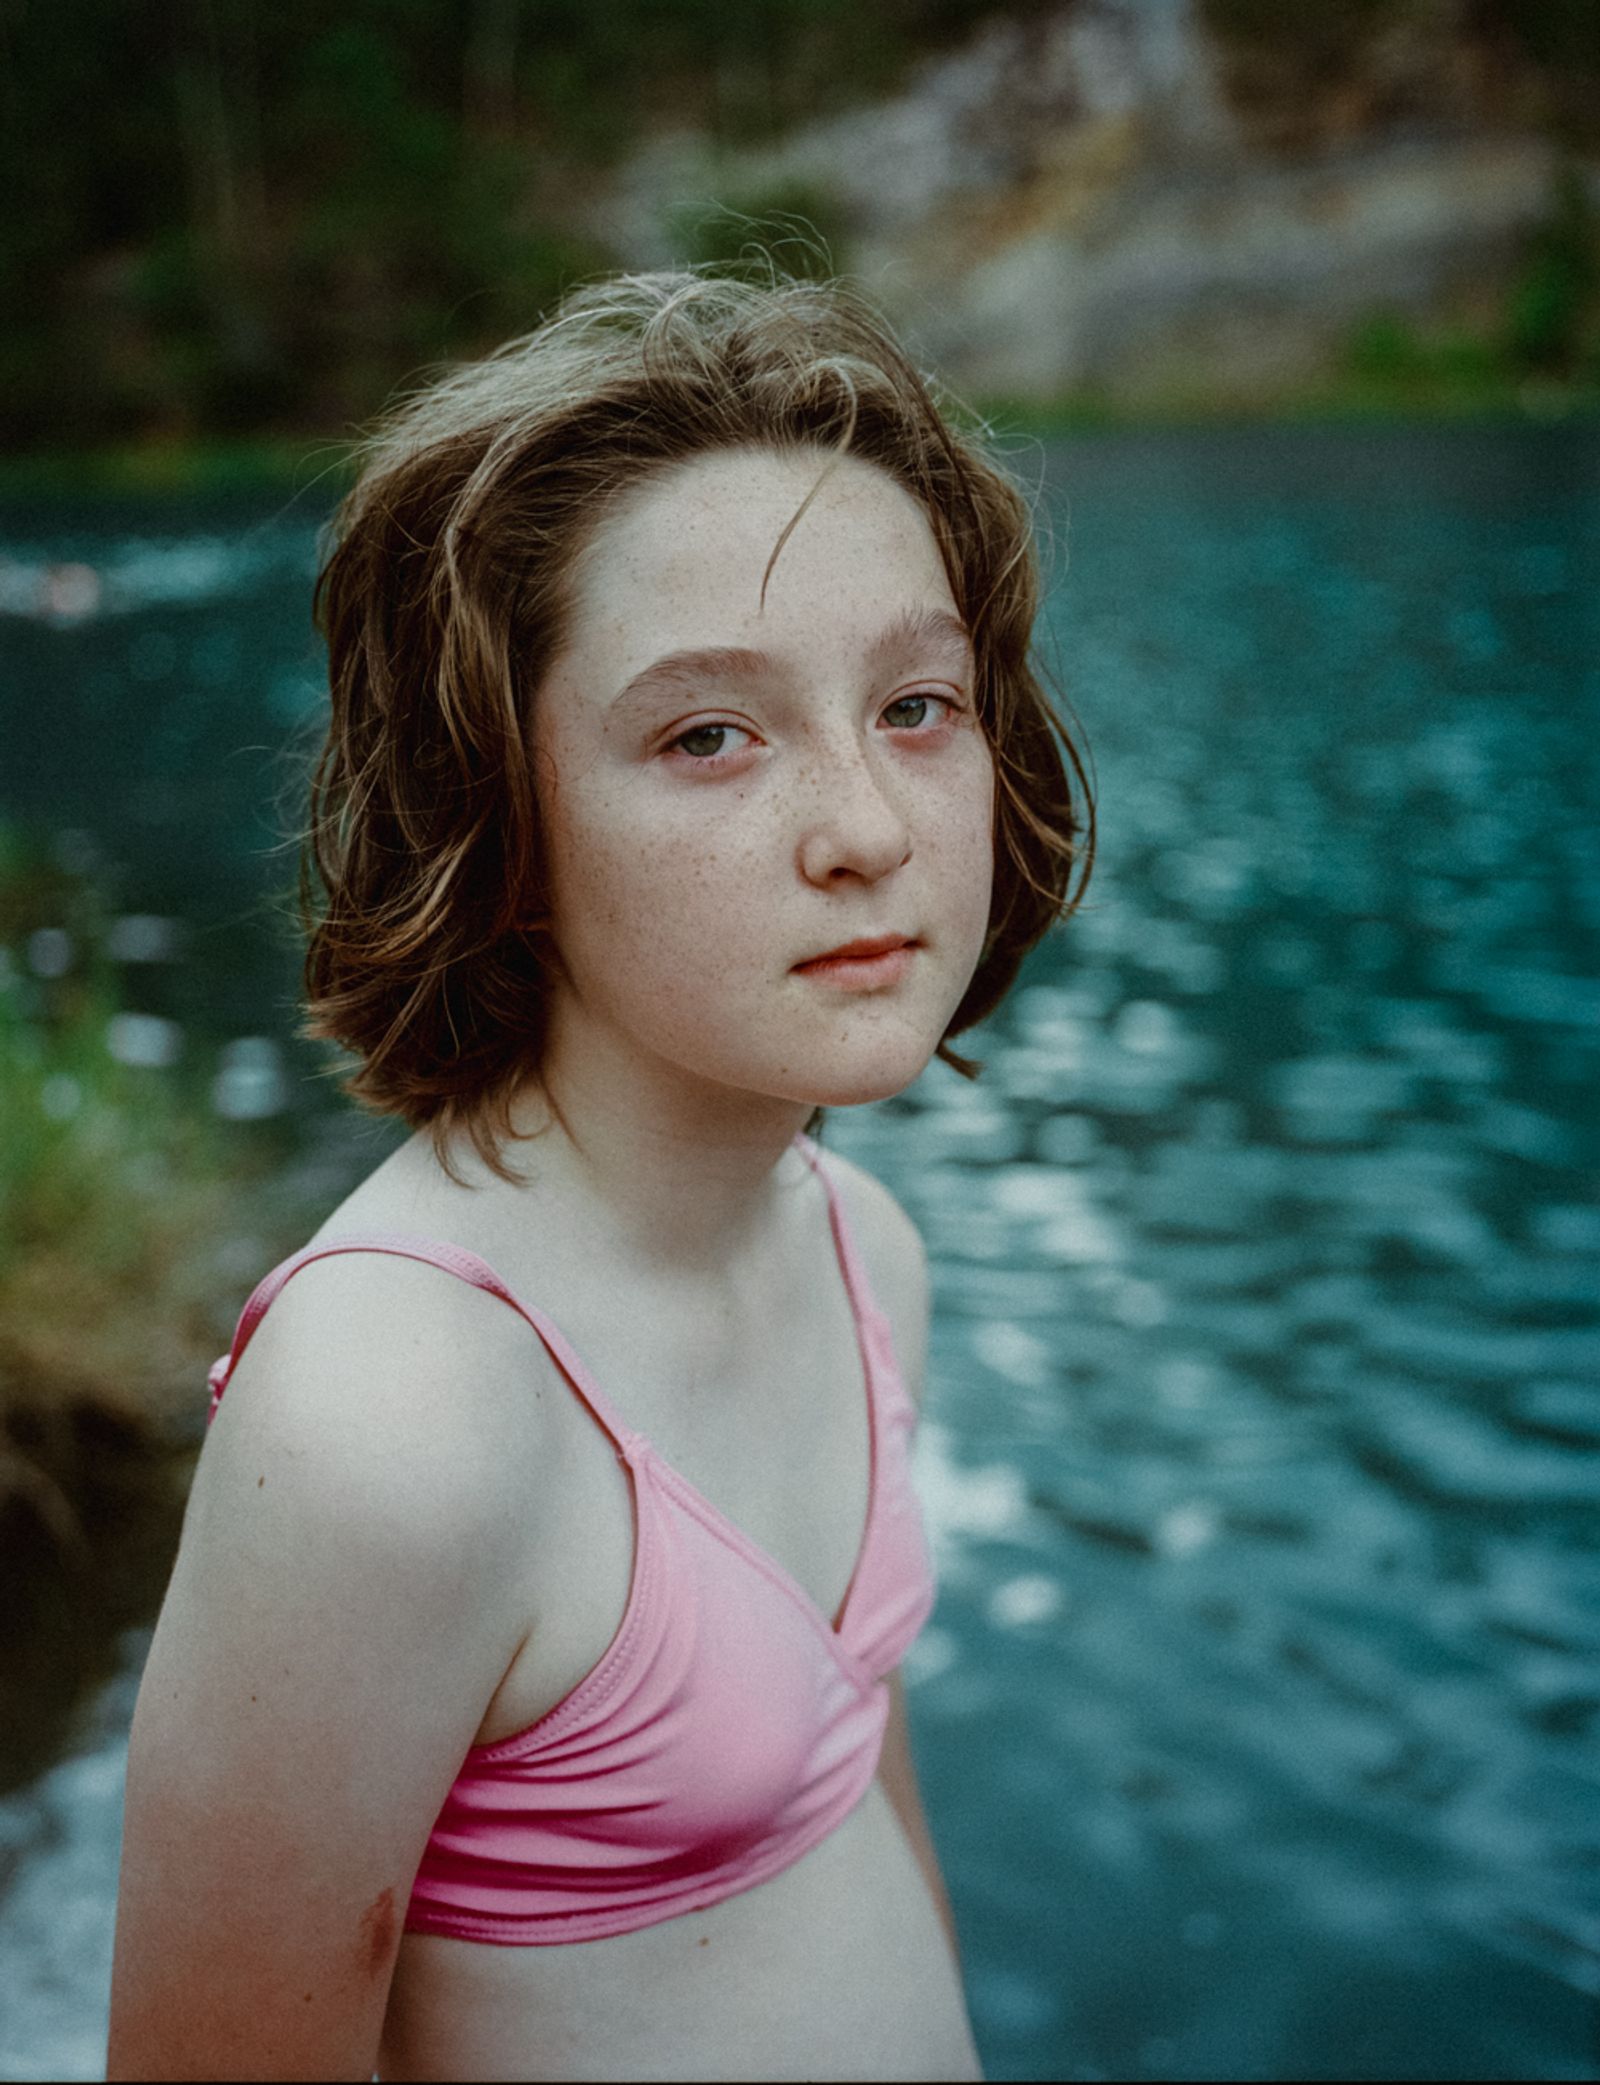 © Tajette O'halloran - Image from the The Quarry photography project